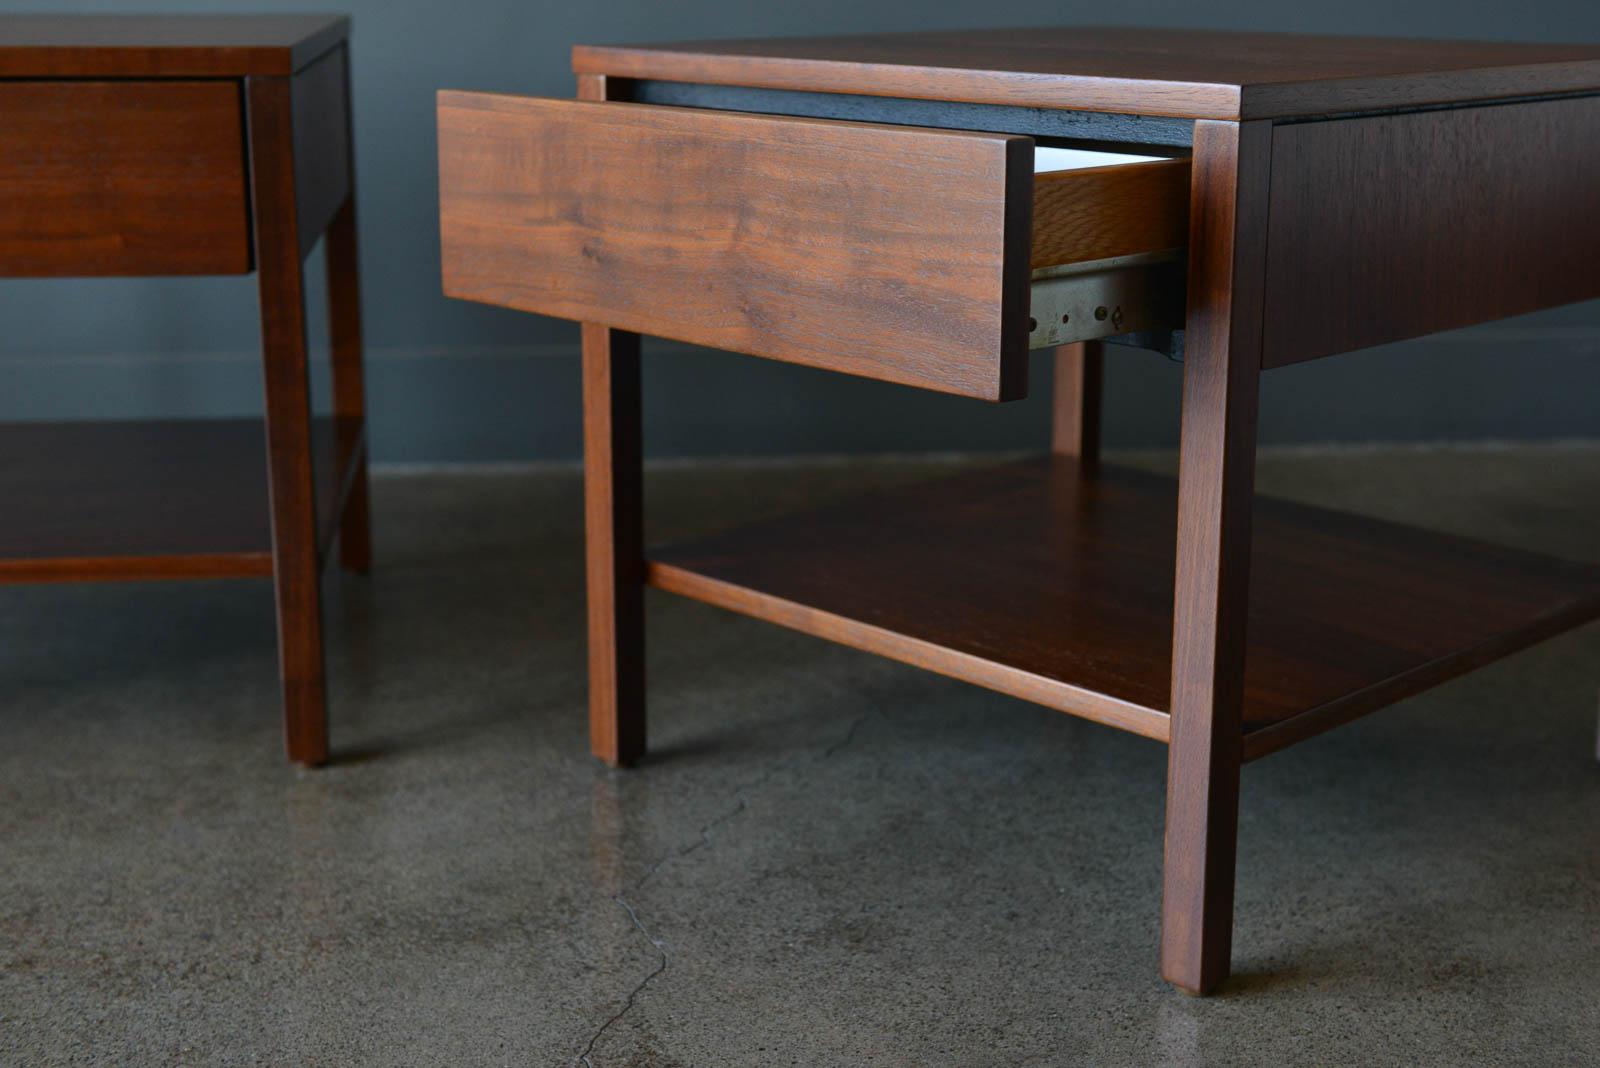 American Pair of Walnut Nightstands or Side Tables by Florence Knoll, ca. 1951